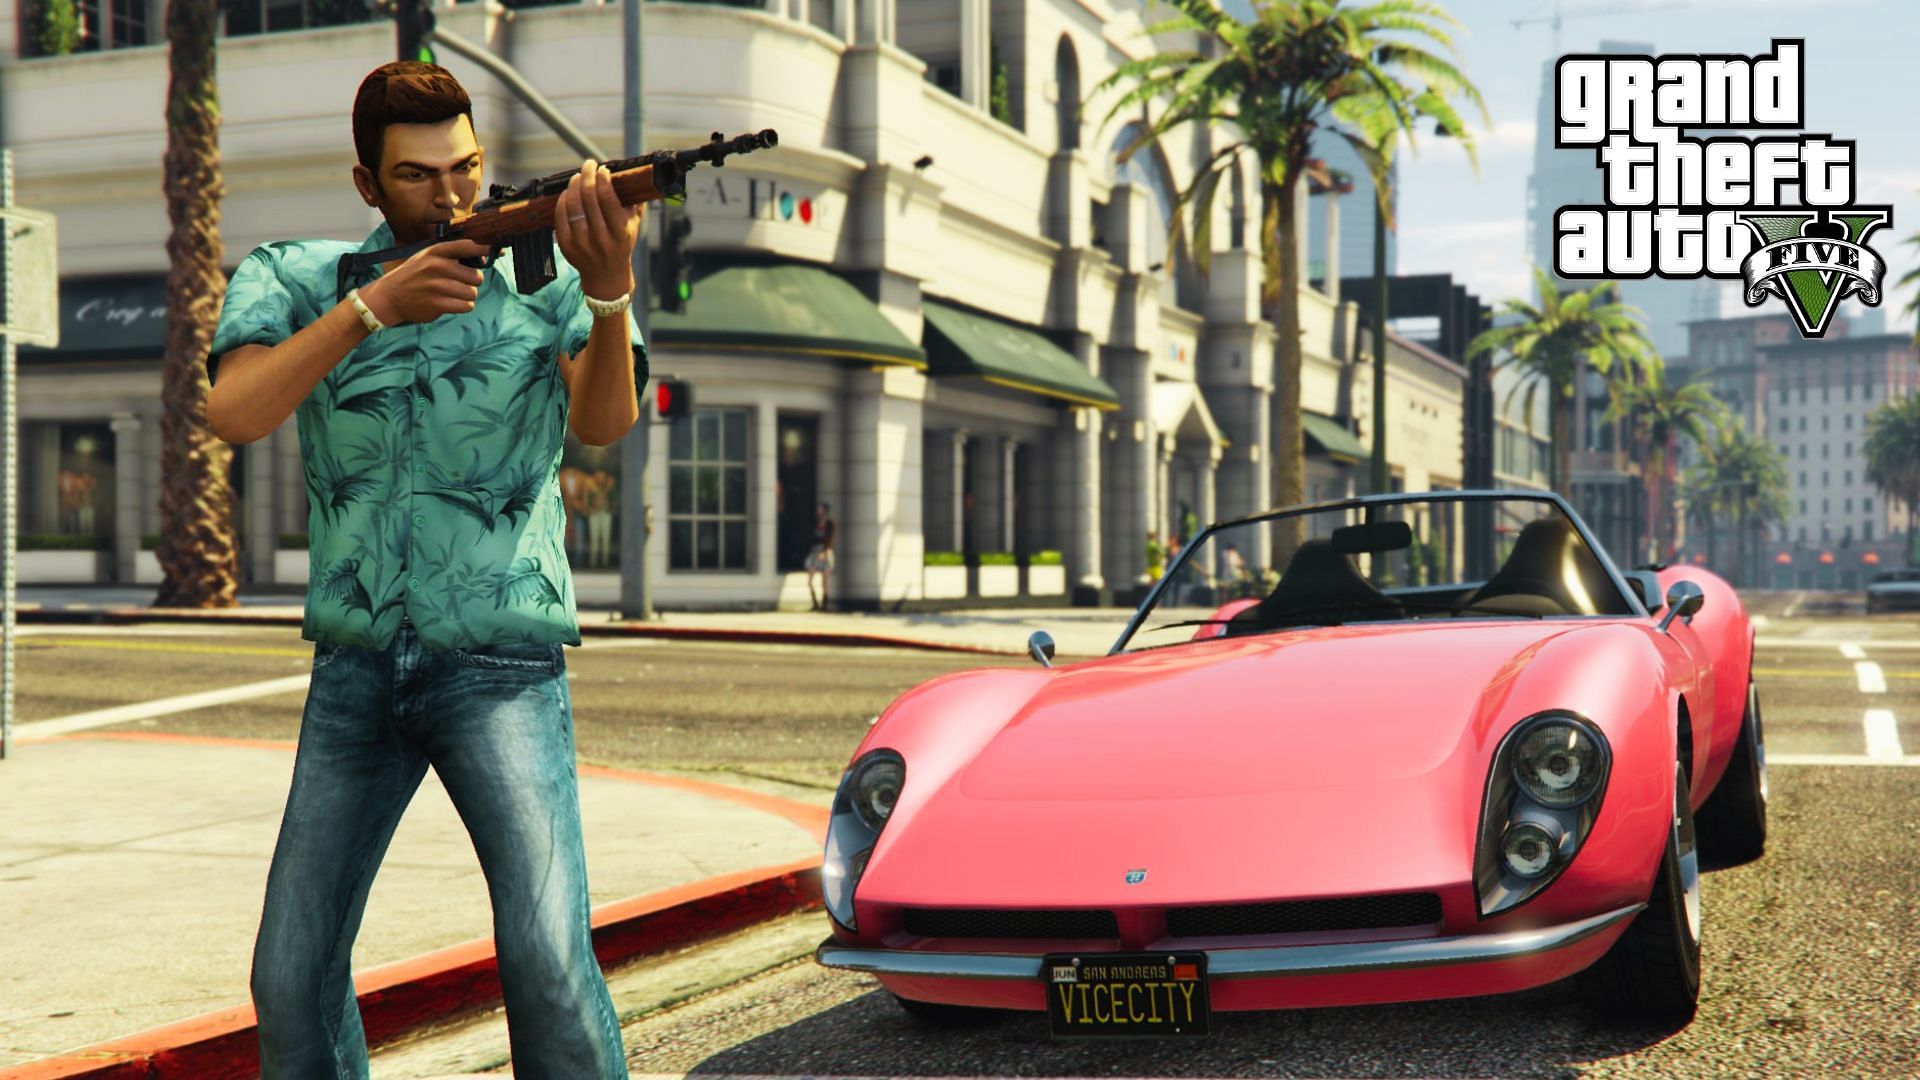 Vice City mods to try in GTA 5 (Image via GTA5-Mods/lunchxbles)